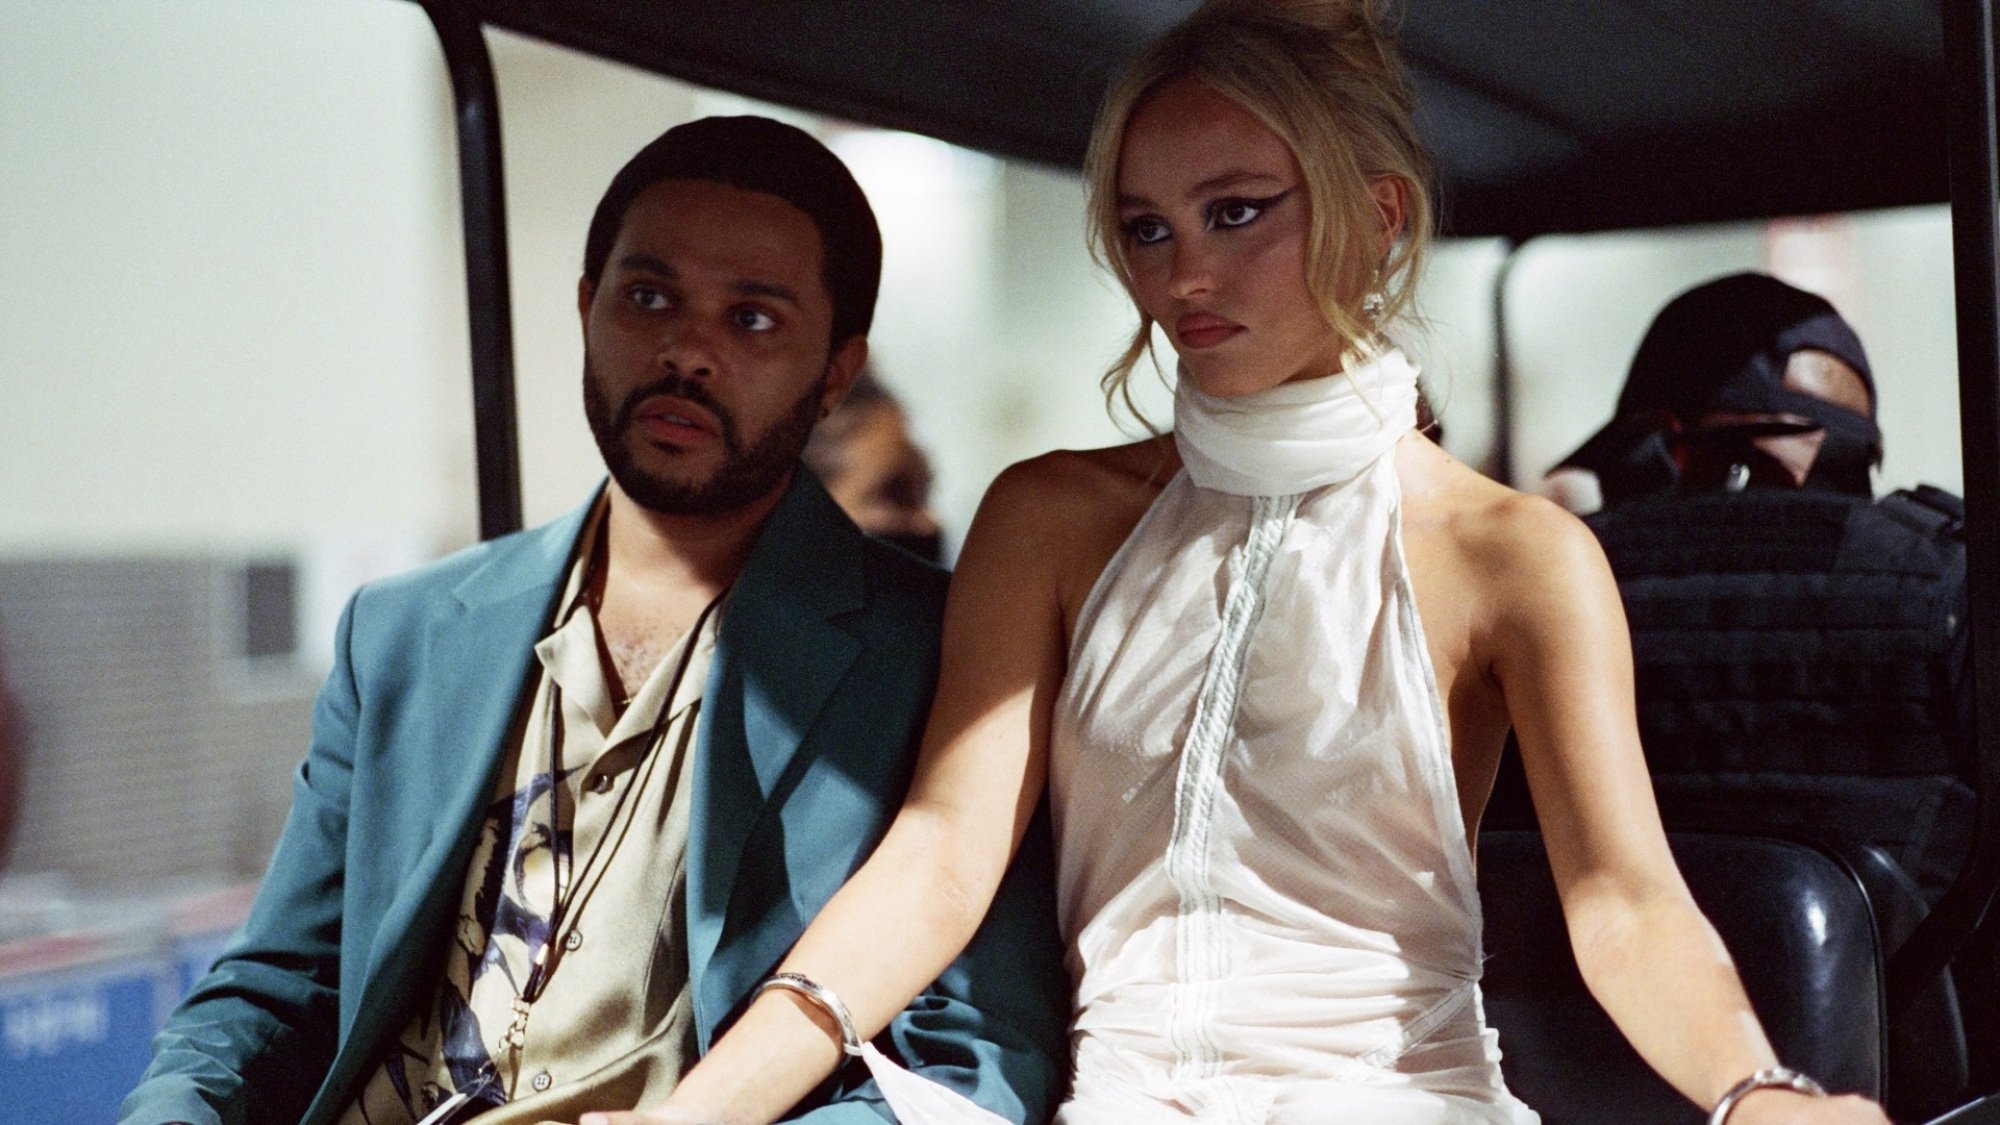 A man in a blue suit and a woman in a white dress ride through a white hallway on the back of a golf cart.